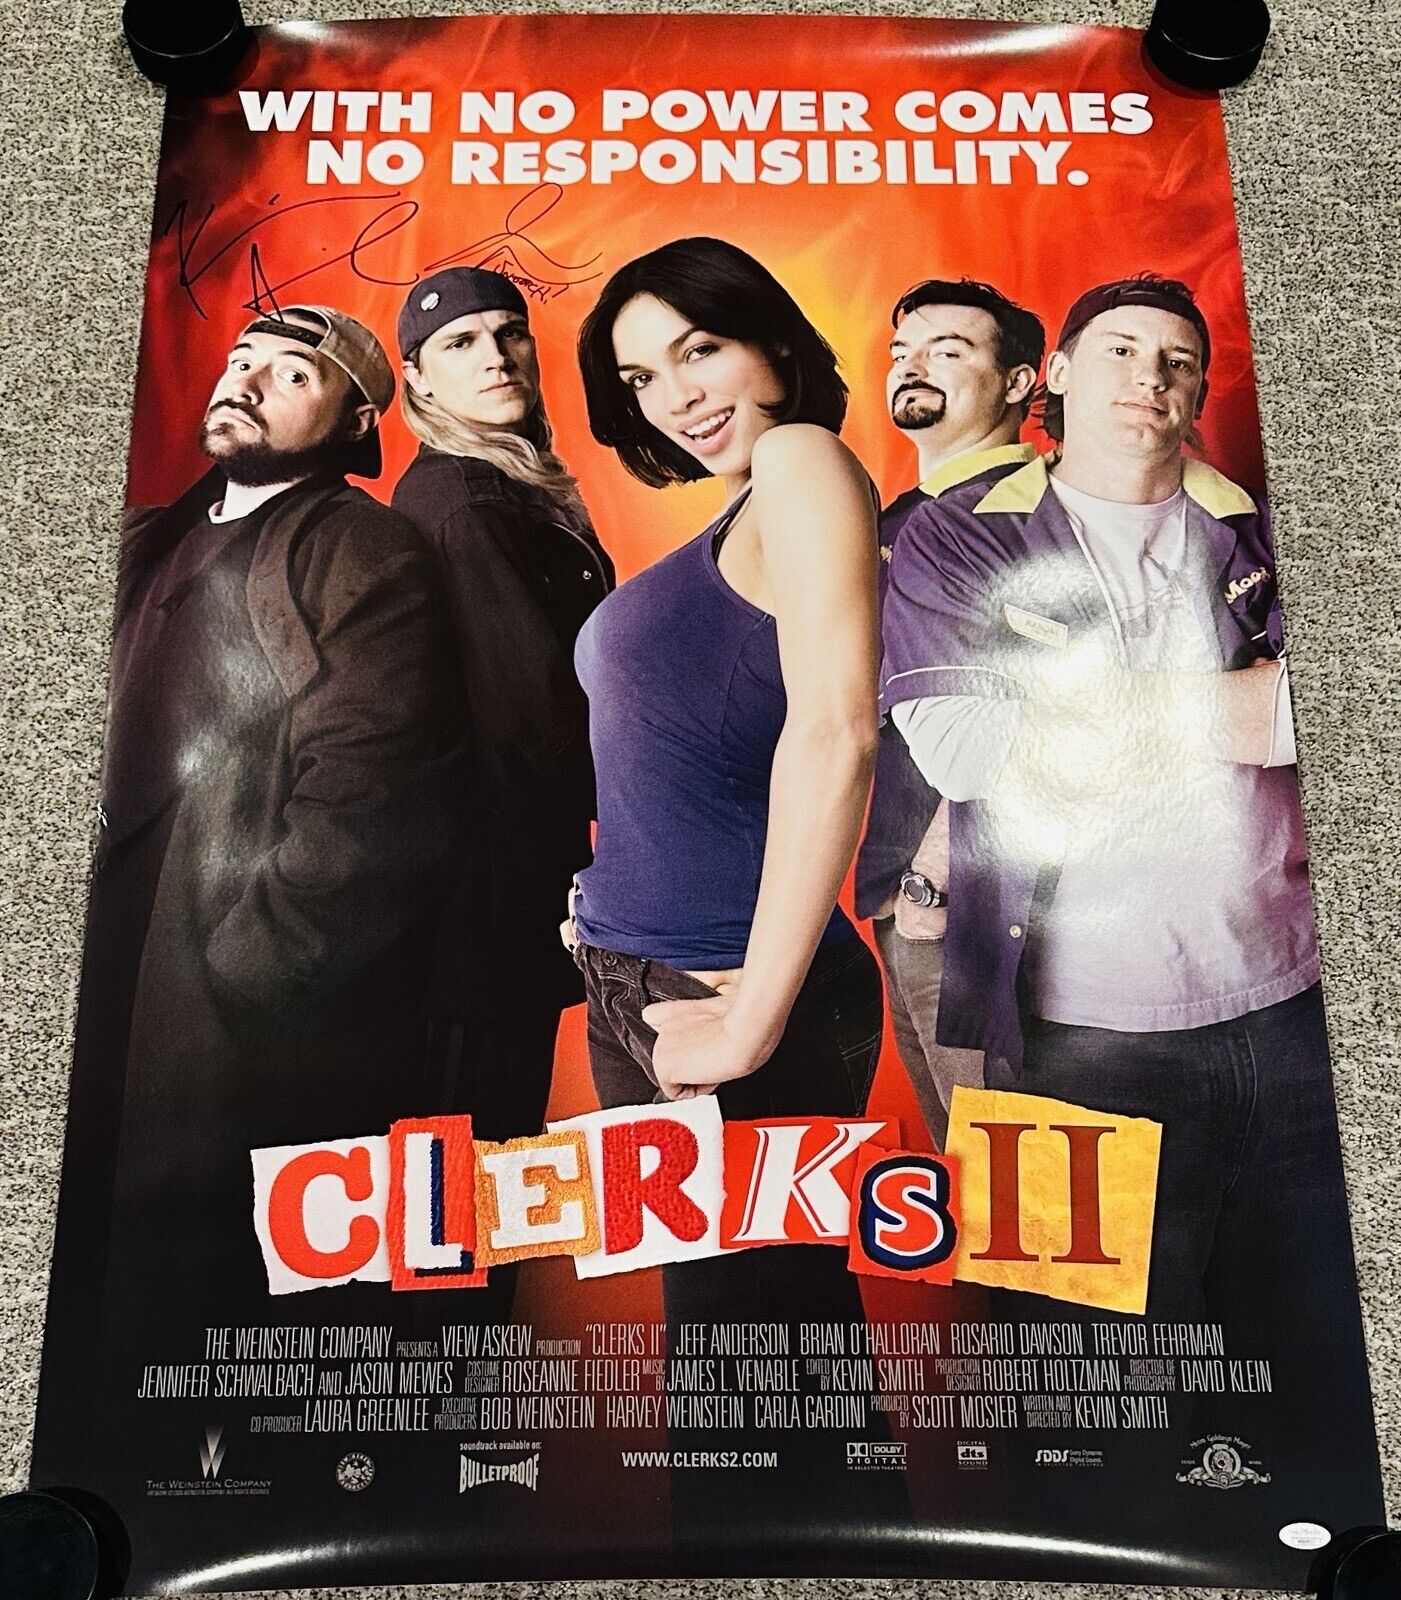 Kevin Smith Jason Mewes Signed Clerks II 27x40 Movie Poster Autographed JSA COA